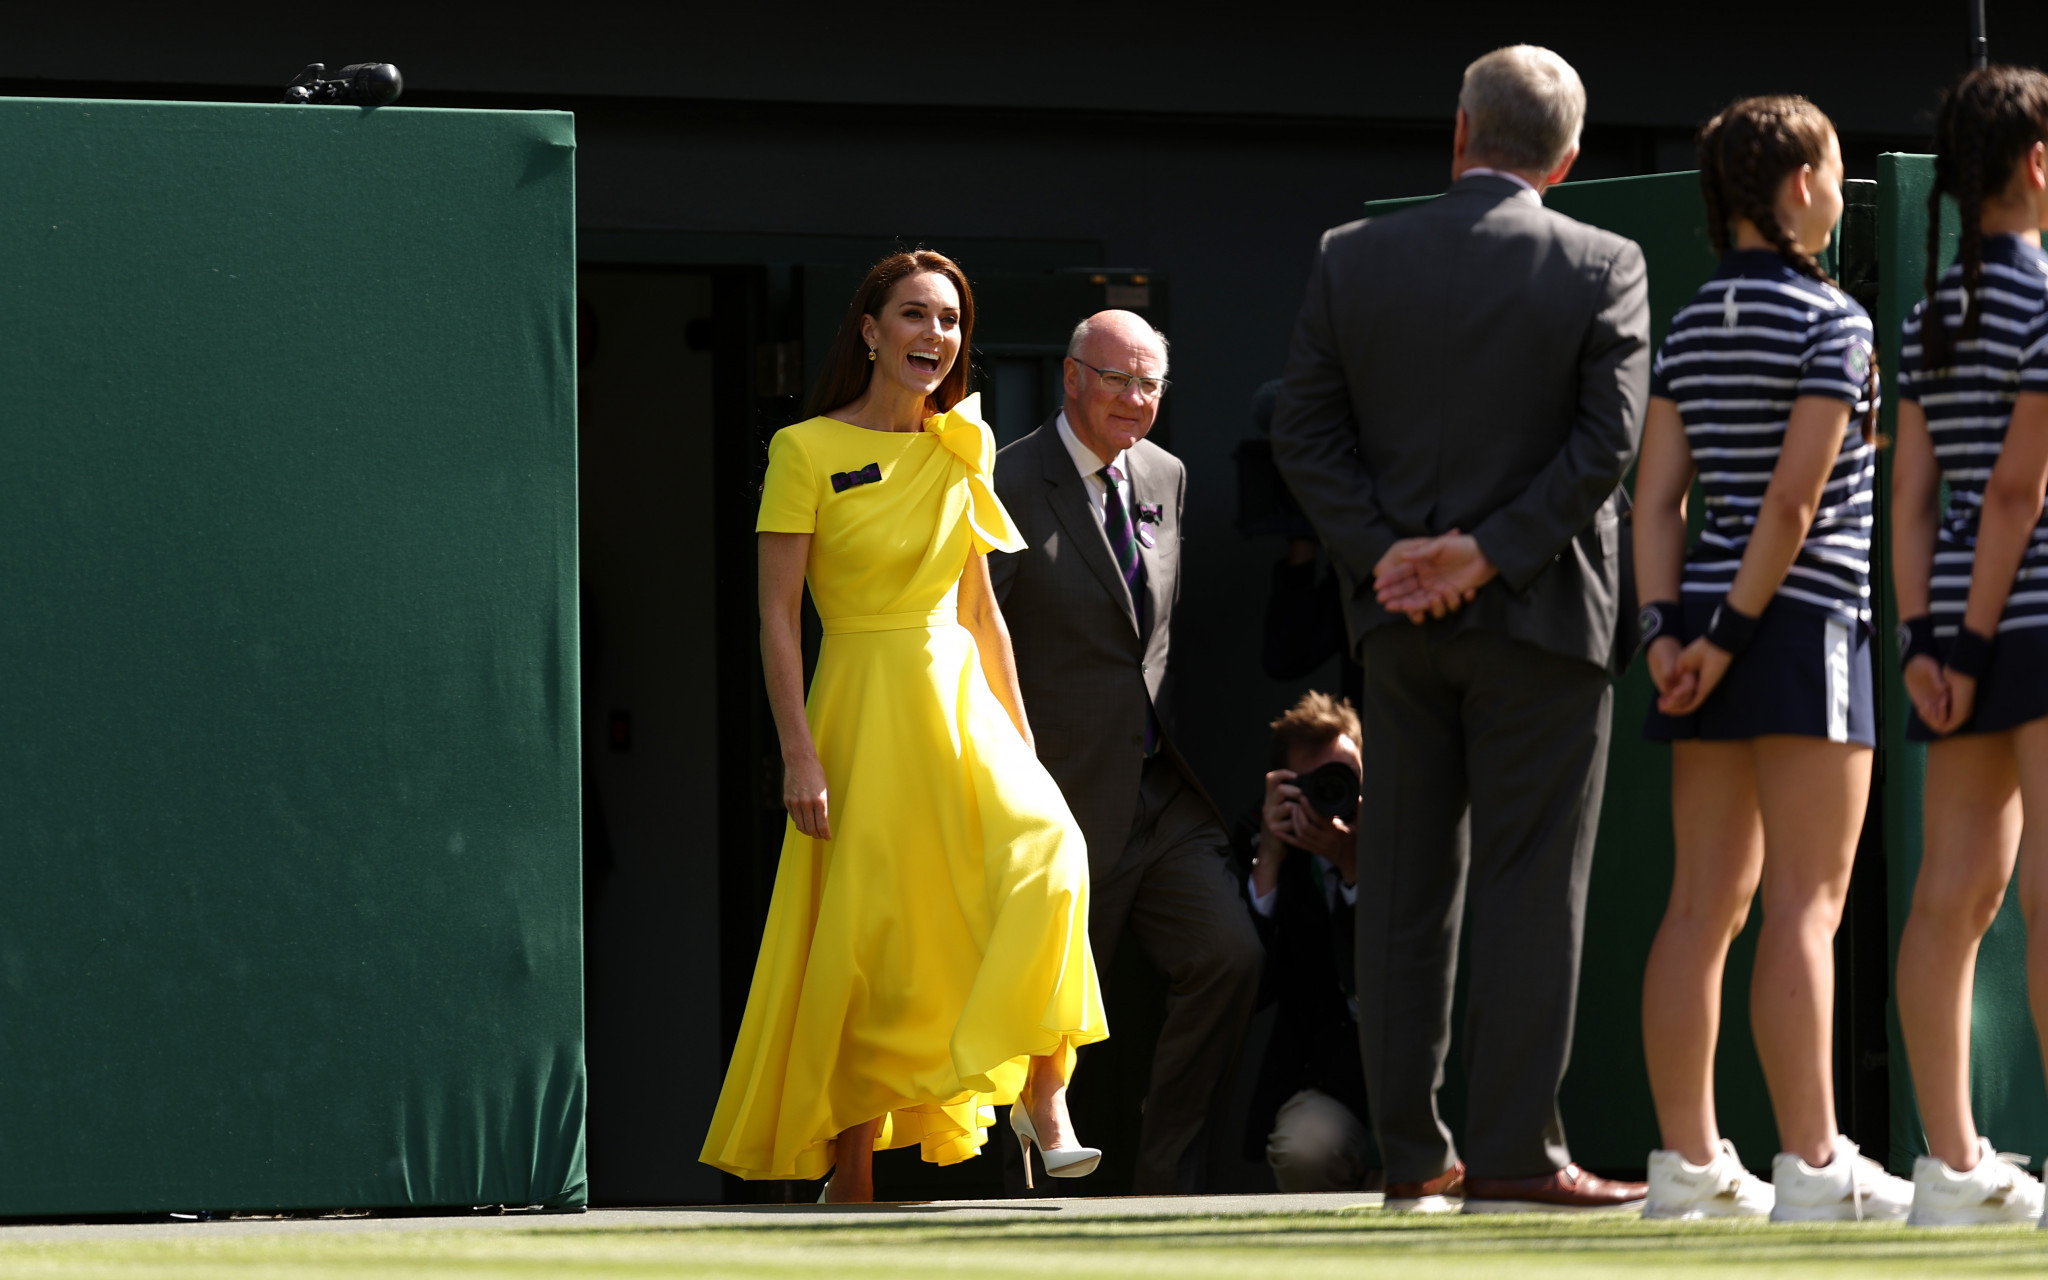 The Dutchess of Cambridge awarded the prizes during the women's singles ©Getty Images